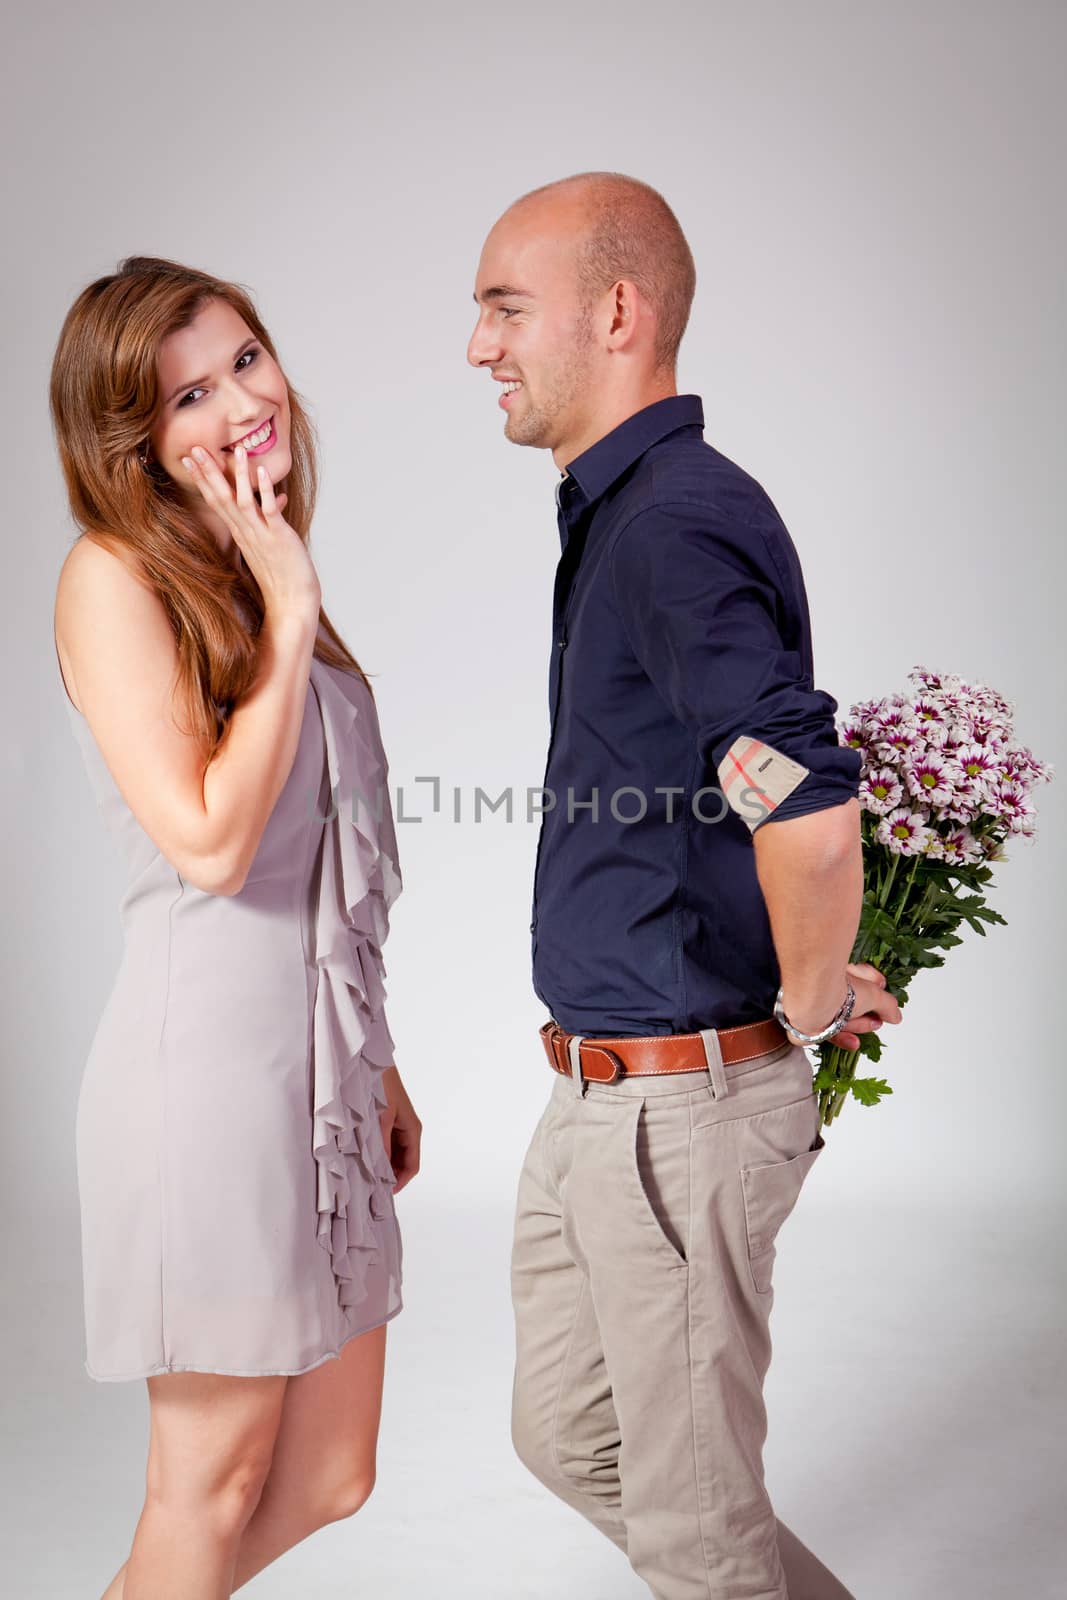 young attractive couple in love embracing portrait on grey backgound 